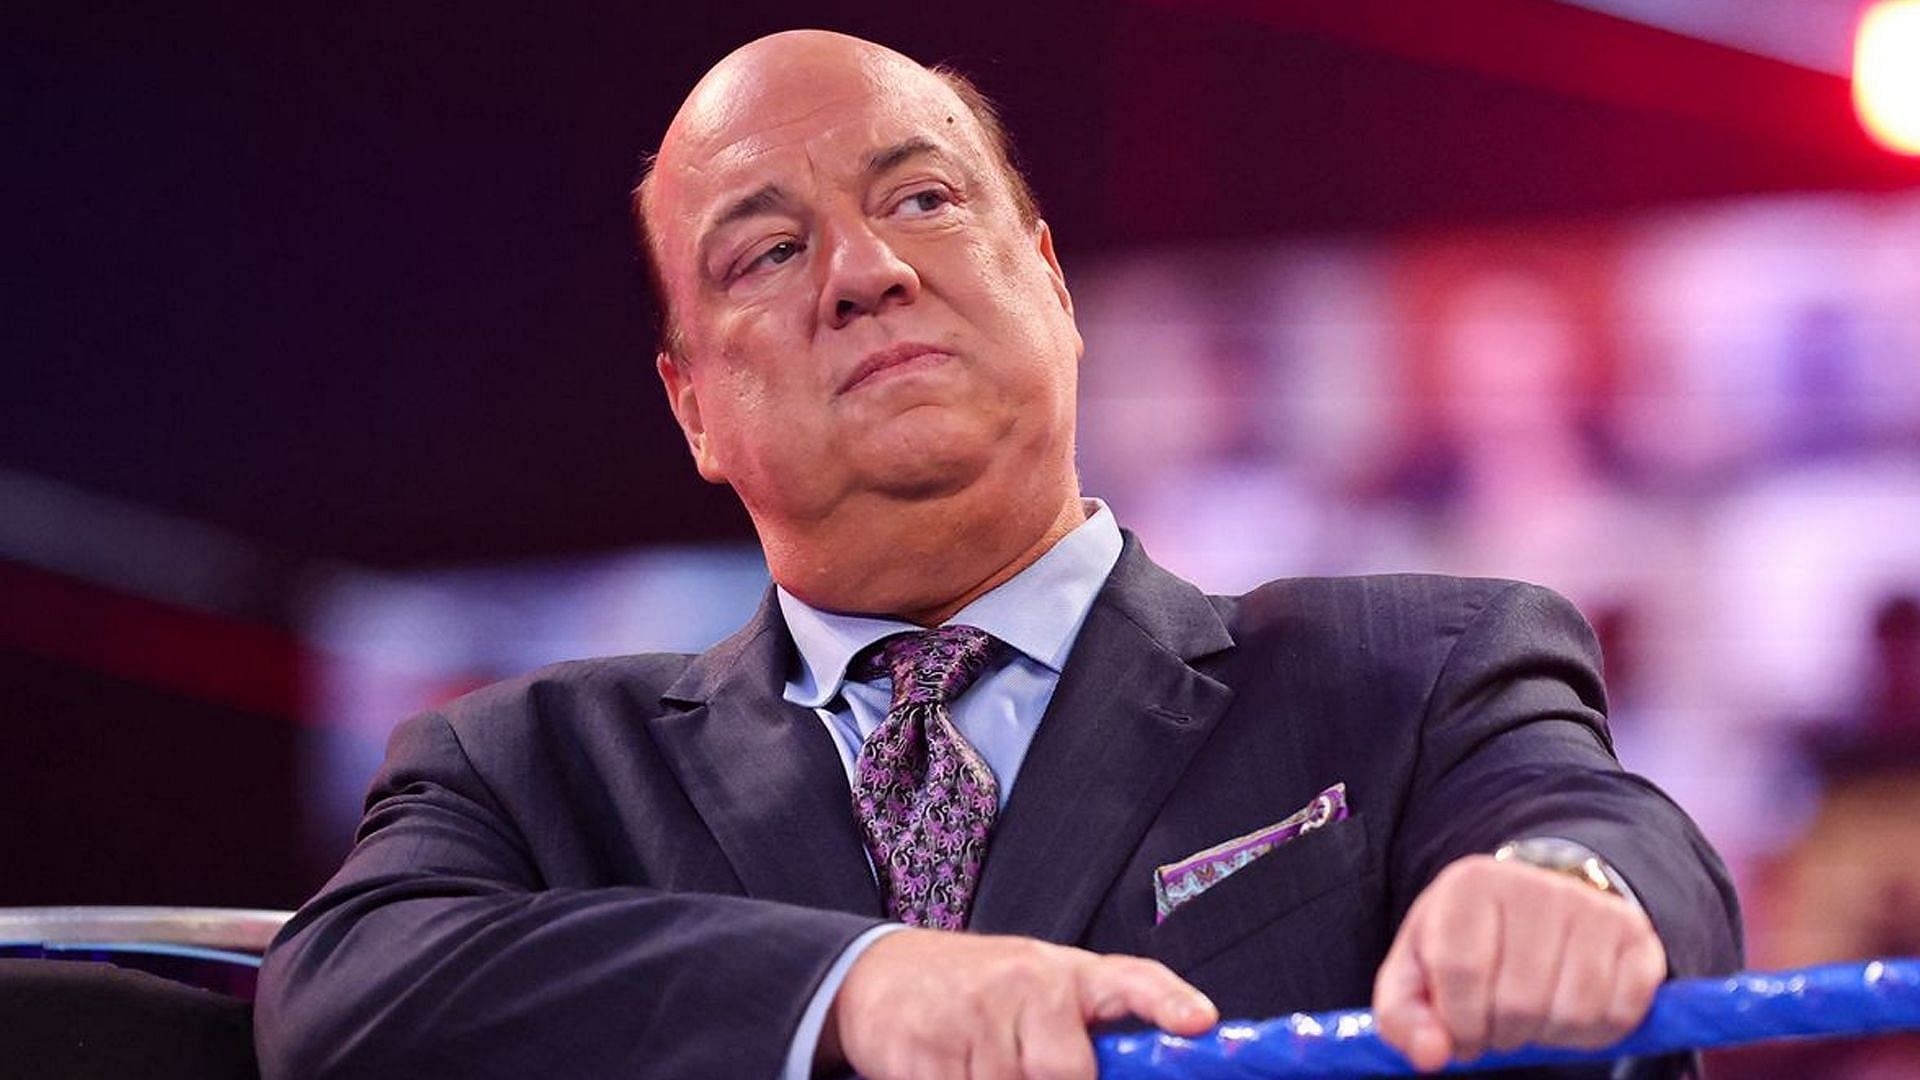 Heyman will arguably go down as one of the greatest wrestling managers of all time.